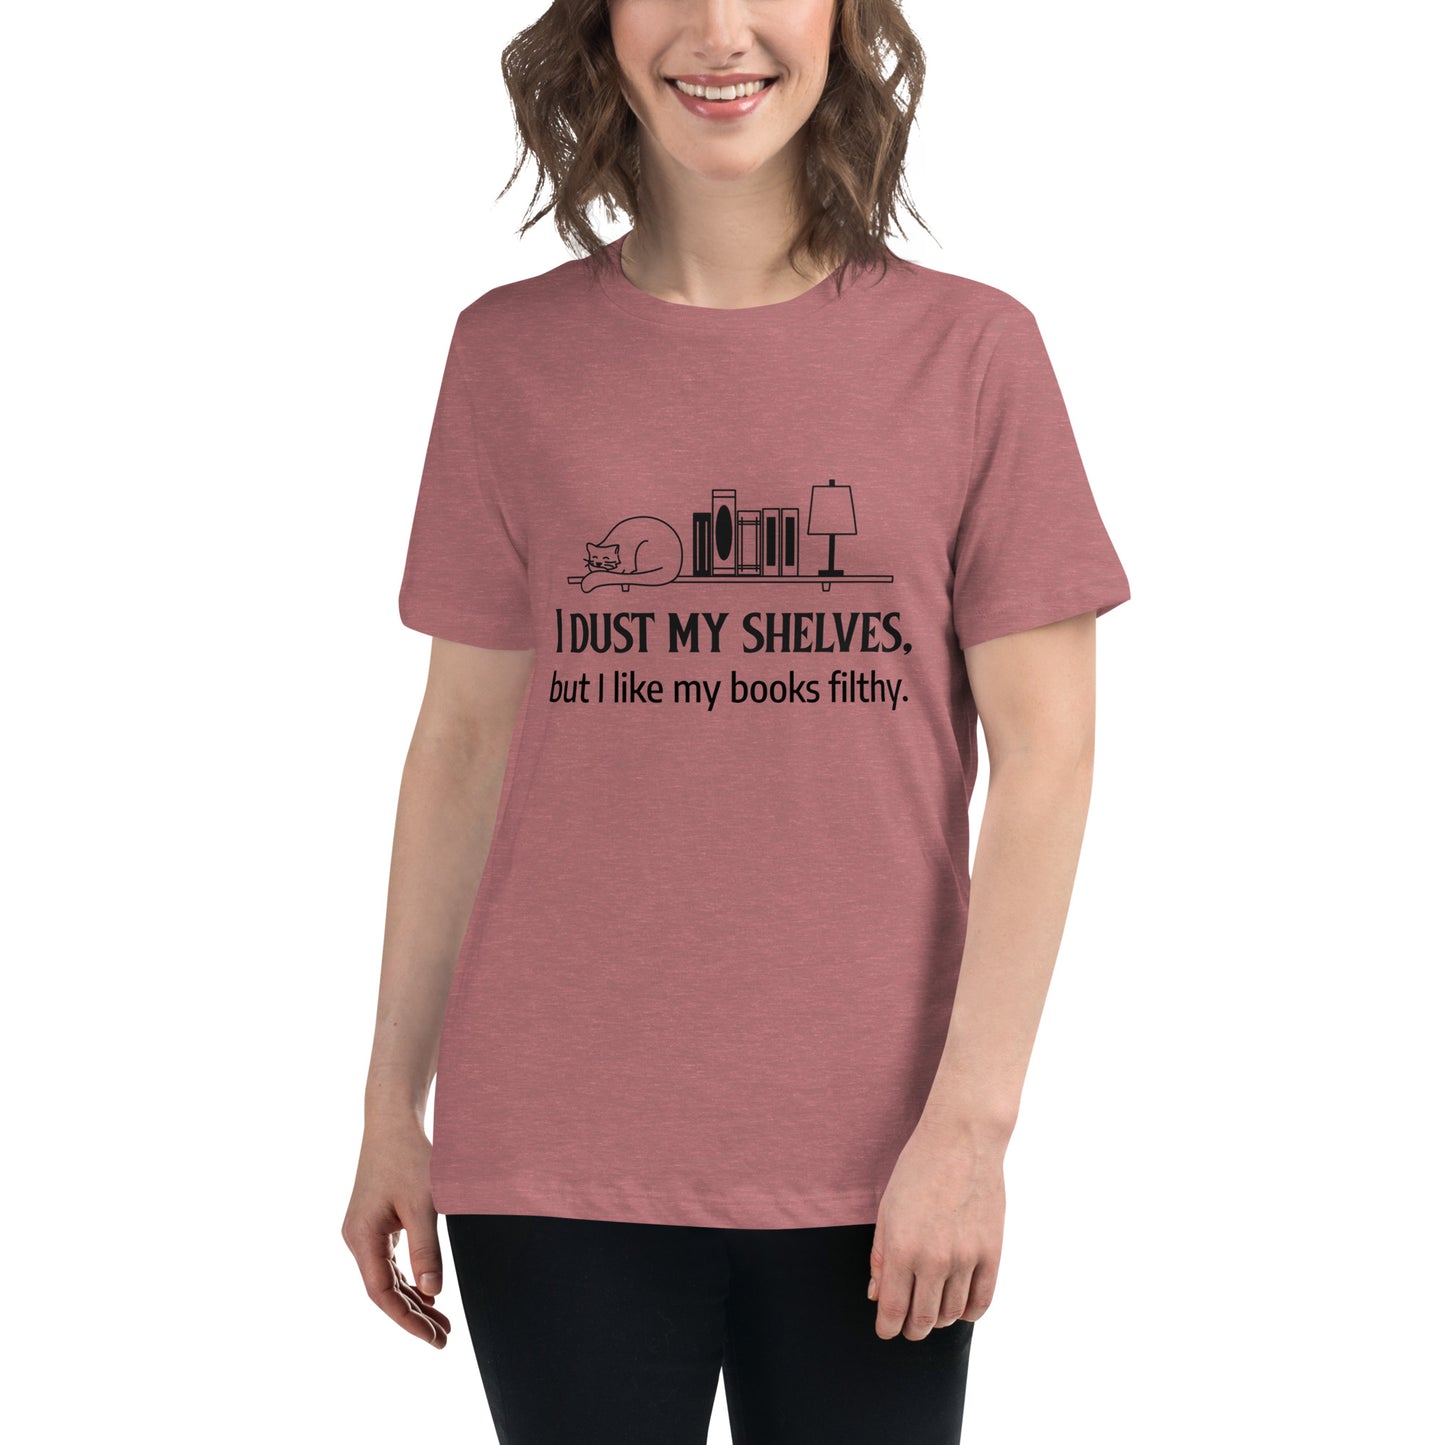 Women's Relaxed T-Shirt I dust my shelves, but I like my books filthy